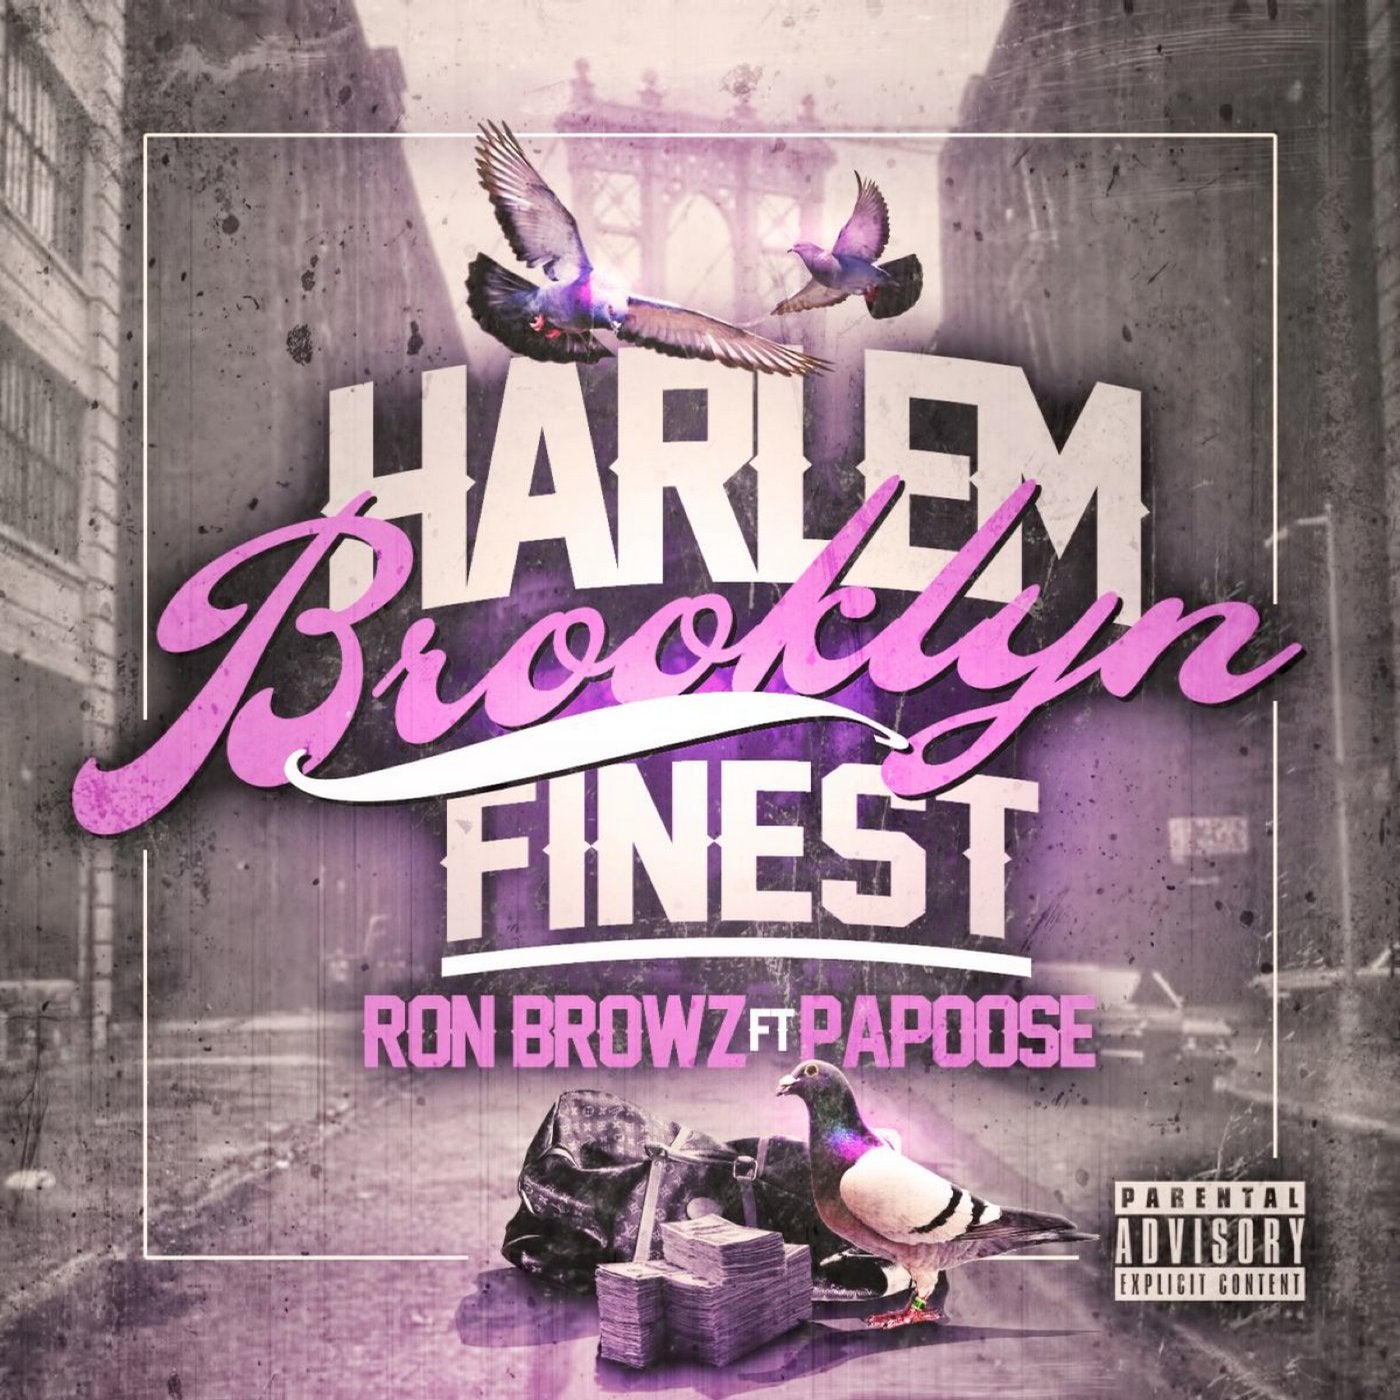 Harlem Brooklyn Finest (feat. Papoose)